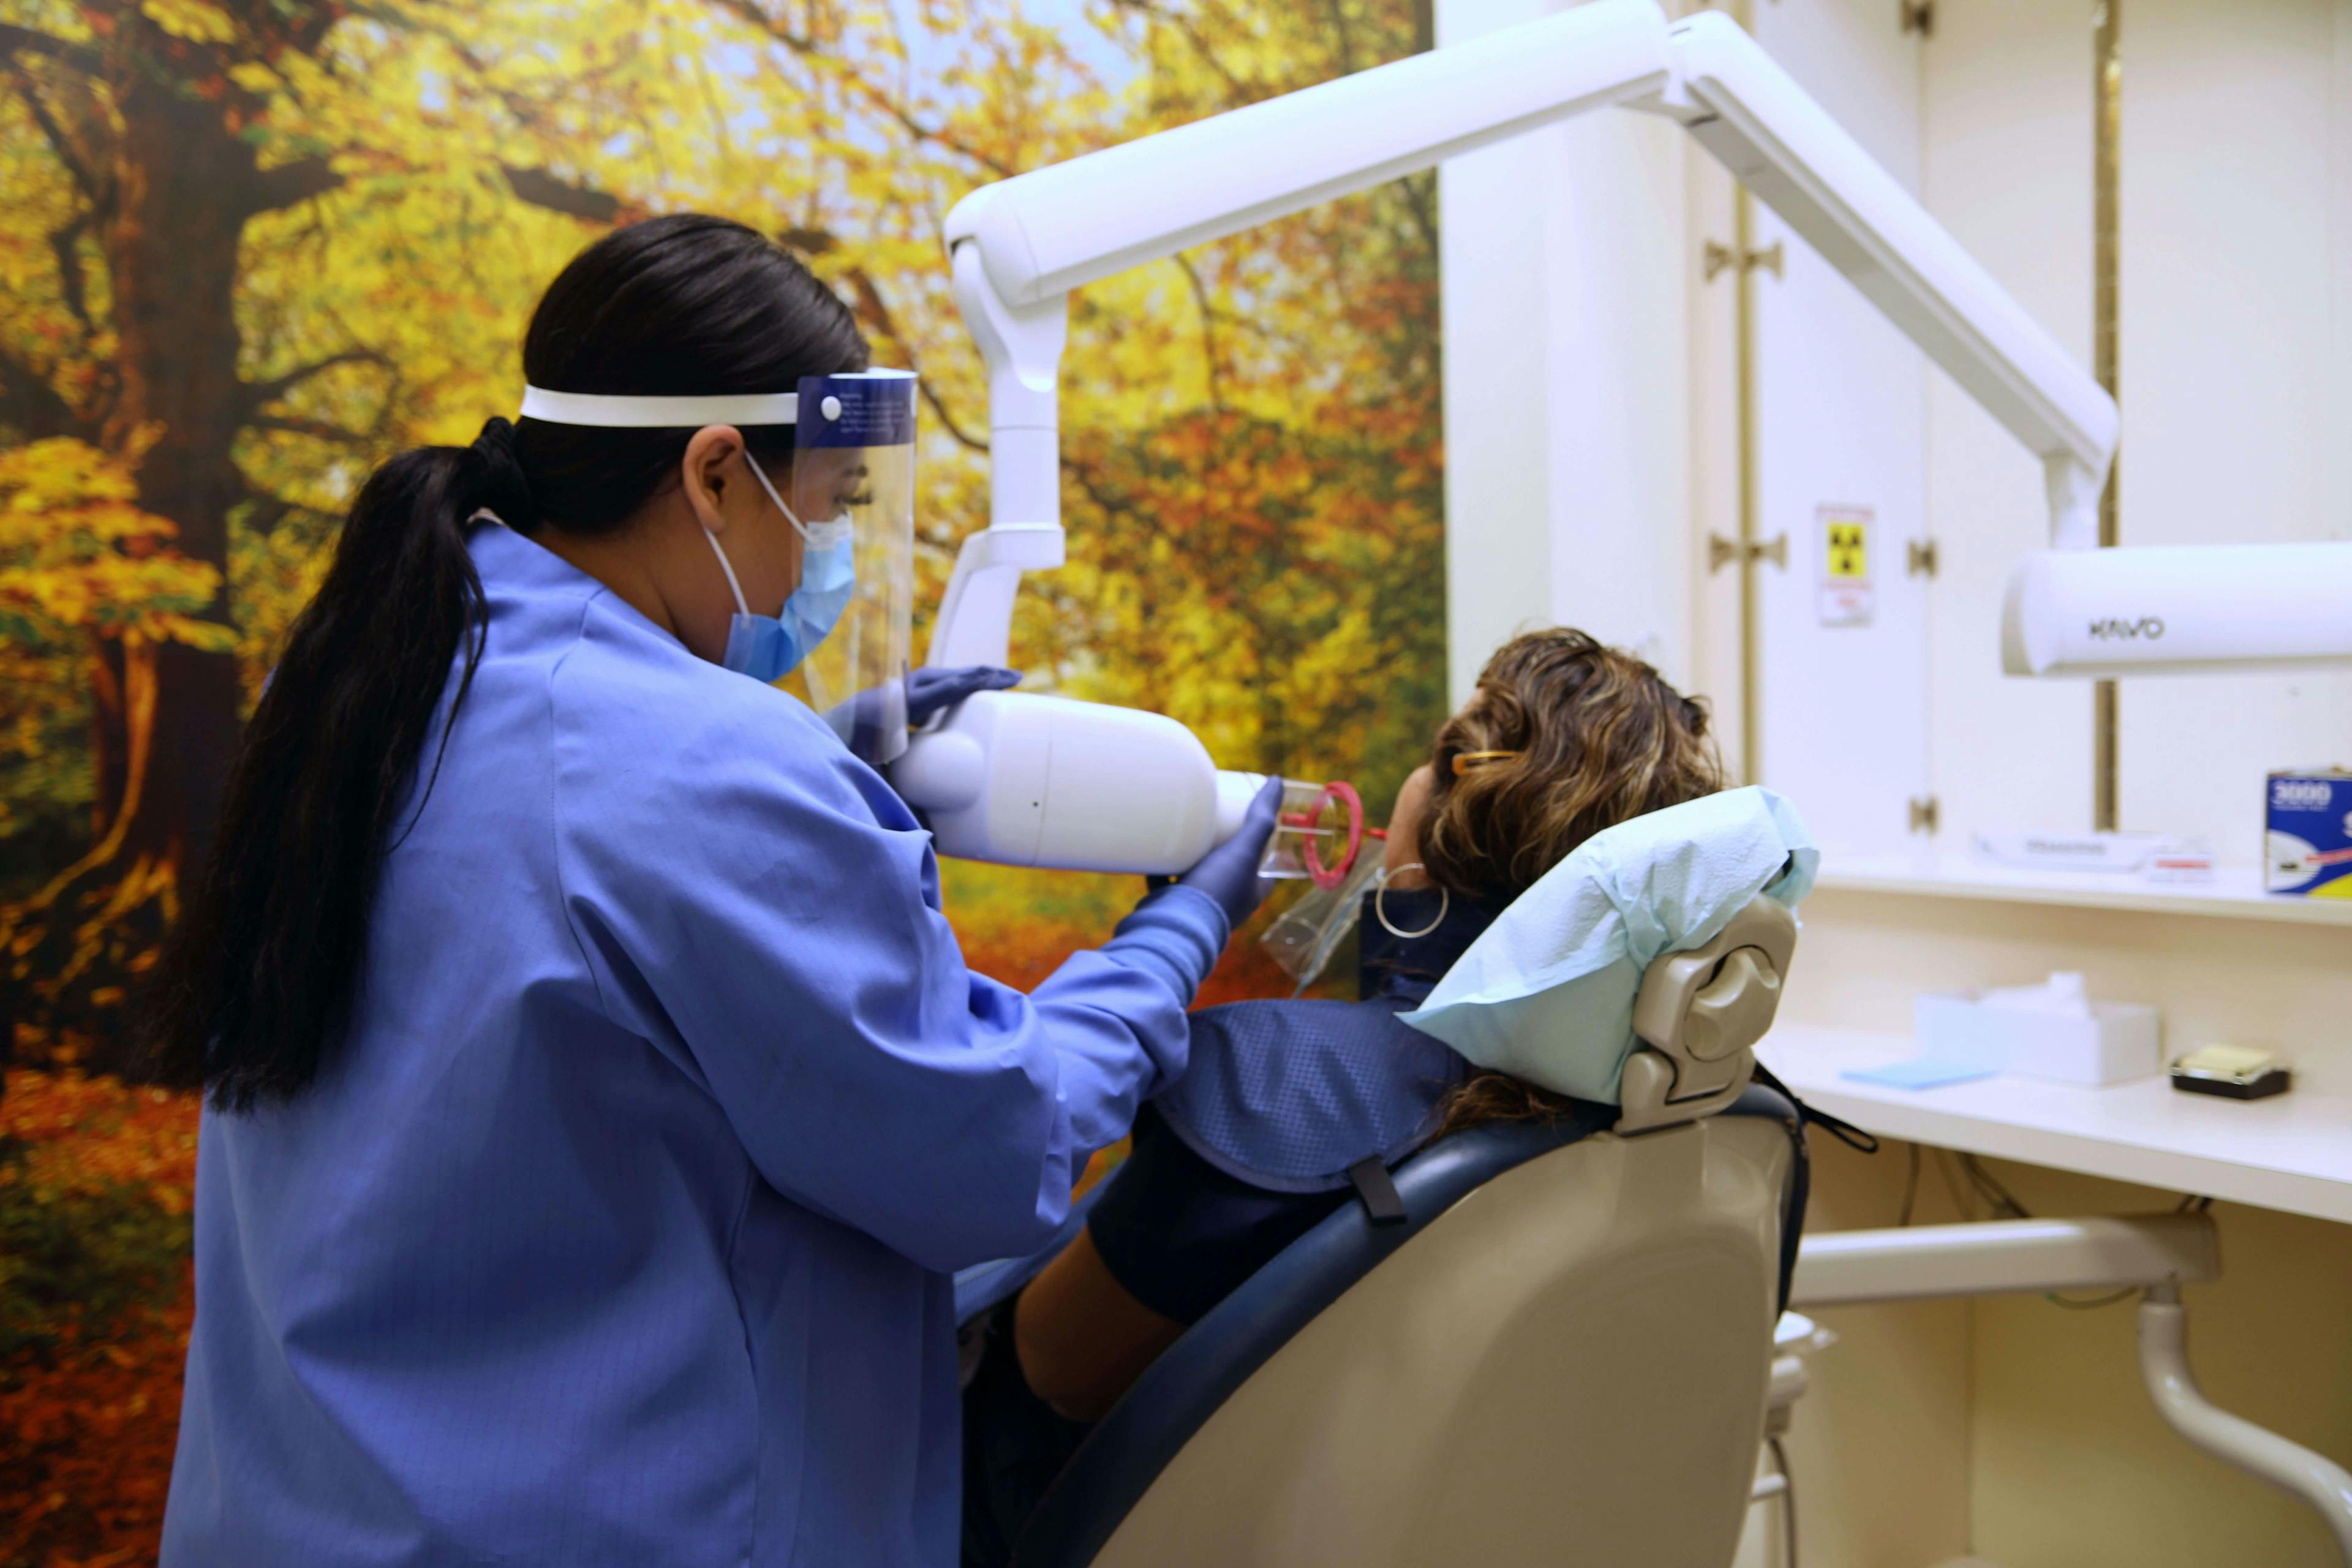 Dental assistance in a process of a taking a X-ray for a patient